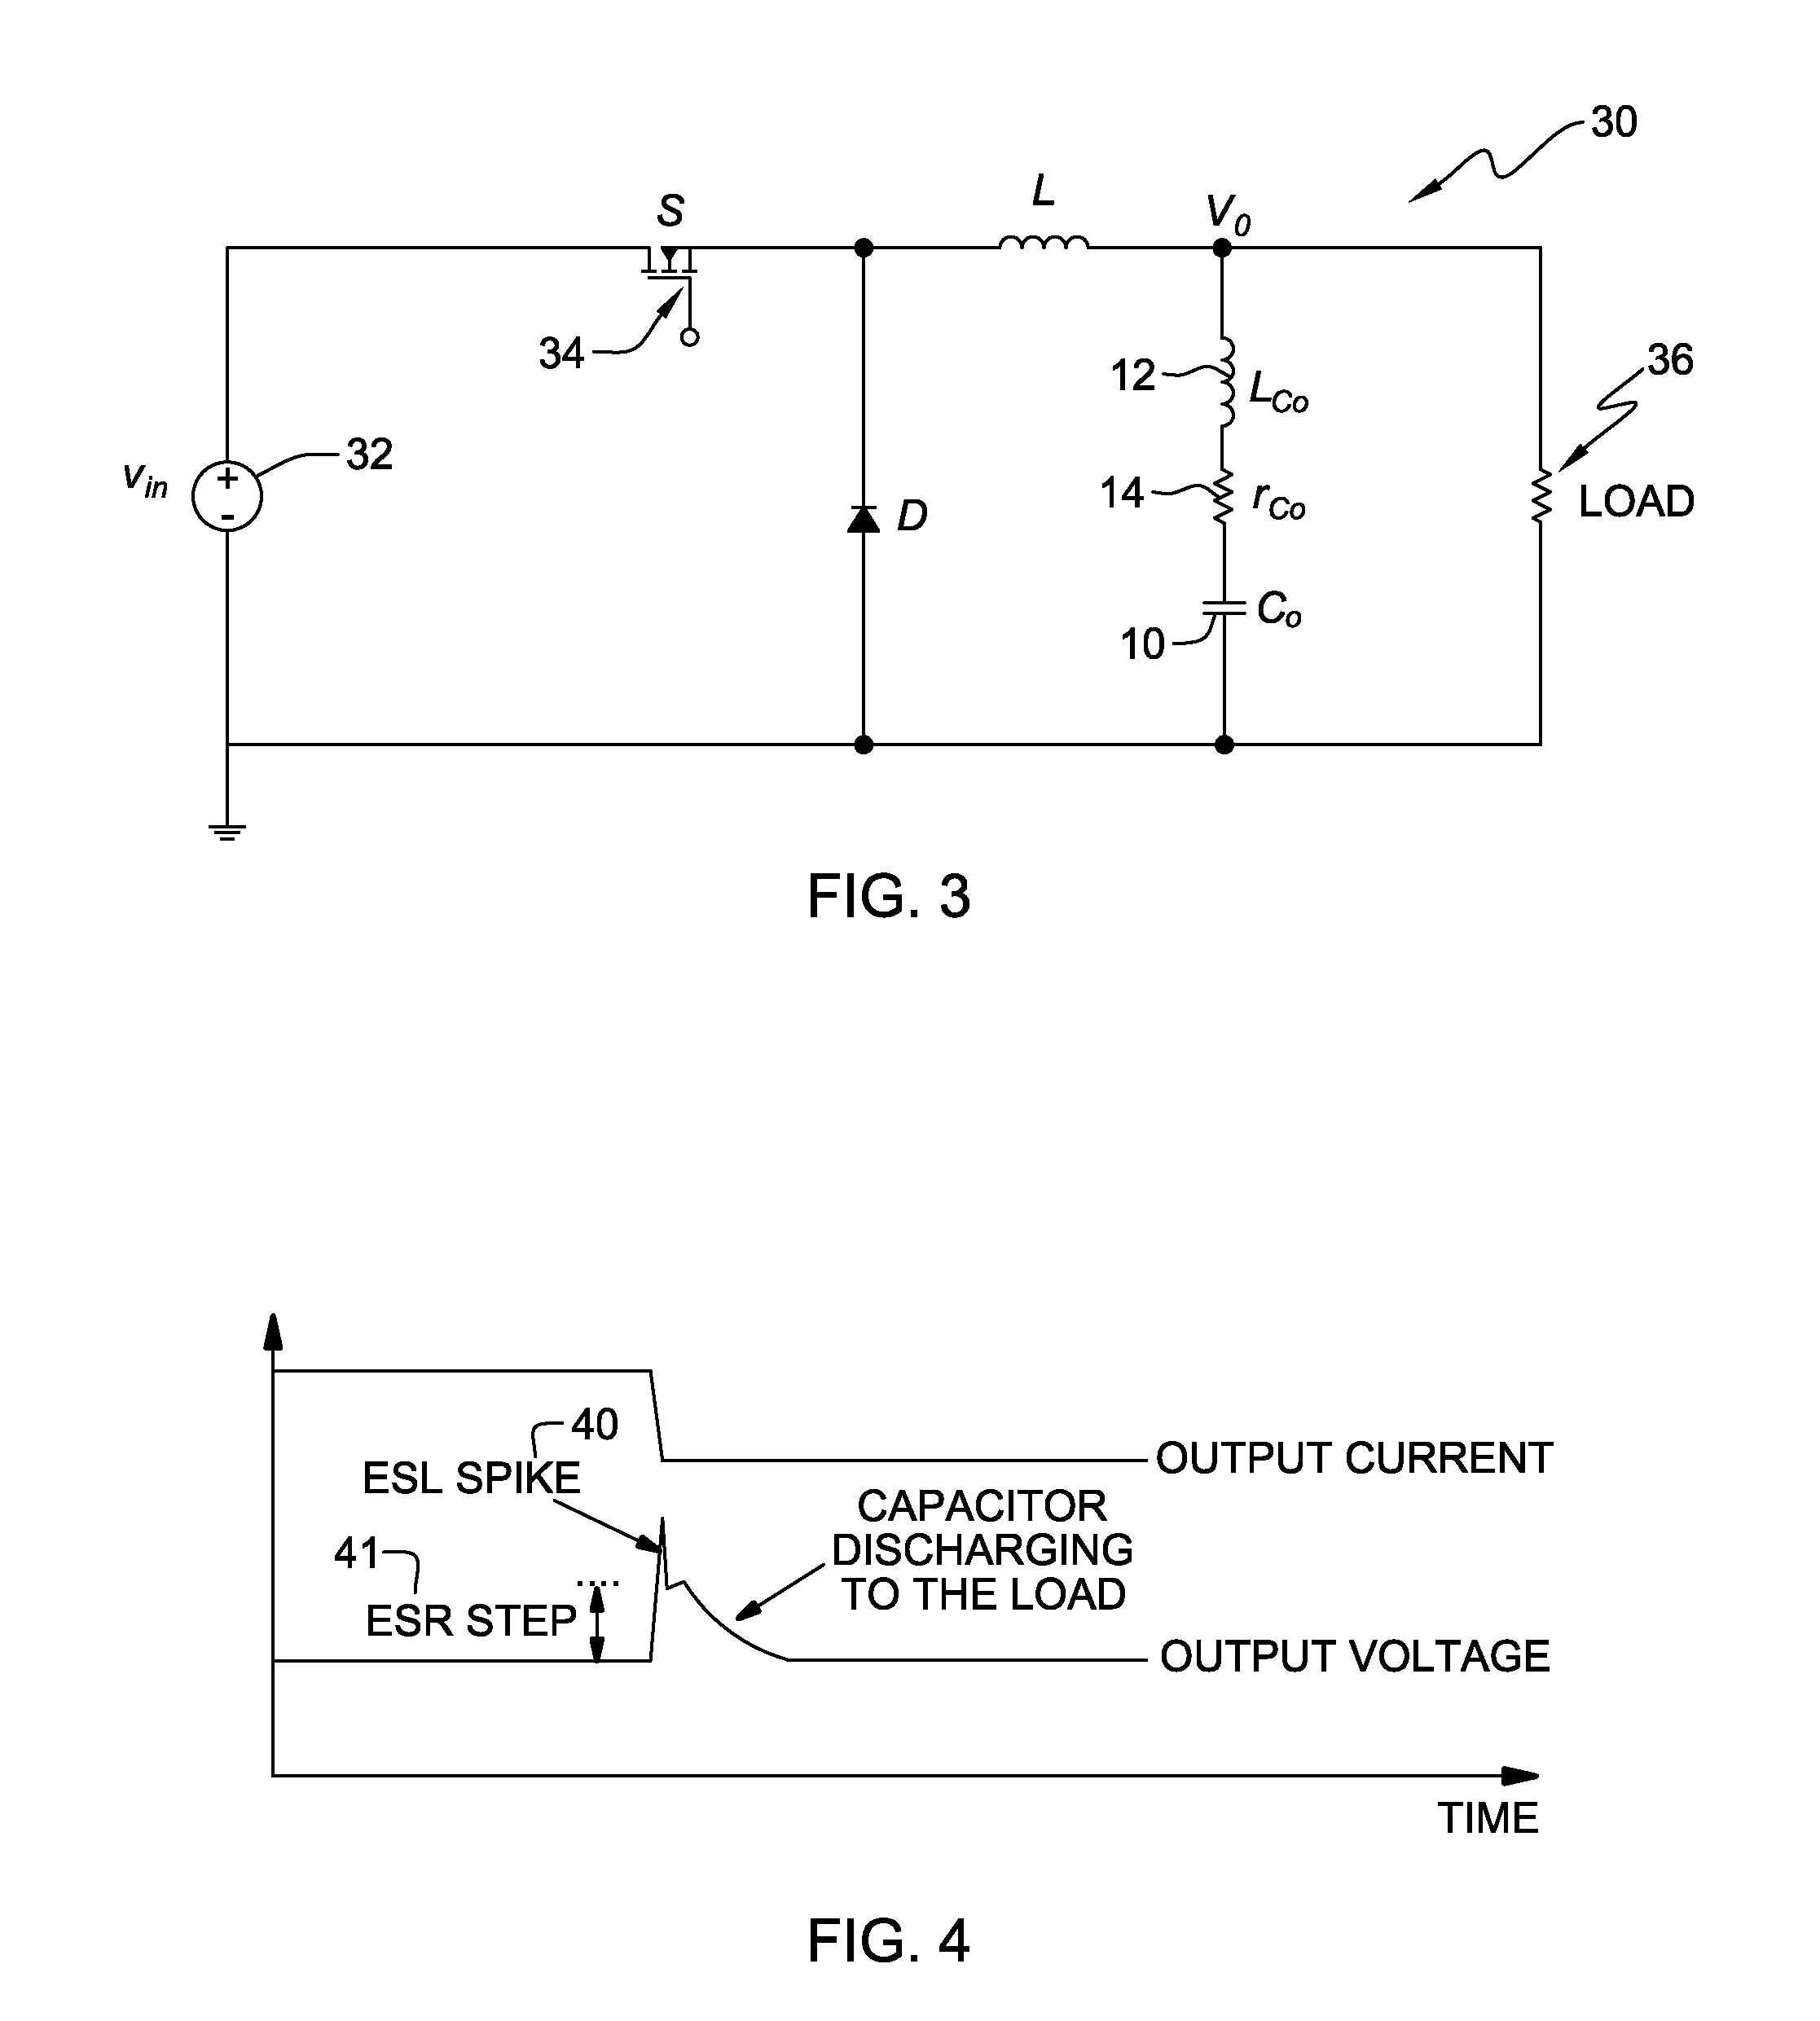 Method and apparatus for suppressing noise caused by parasitic inductance and/or resistance in an electronic circuit or system